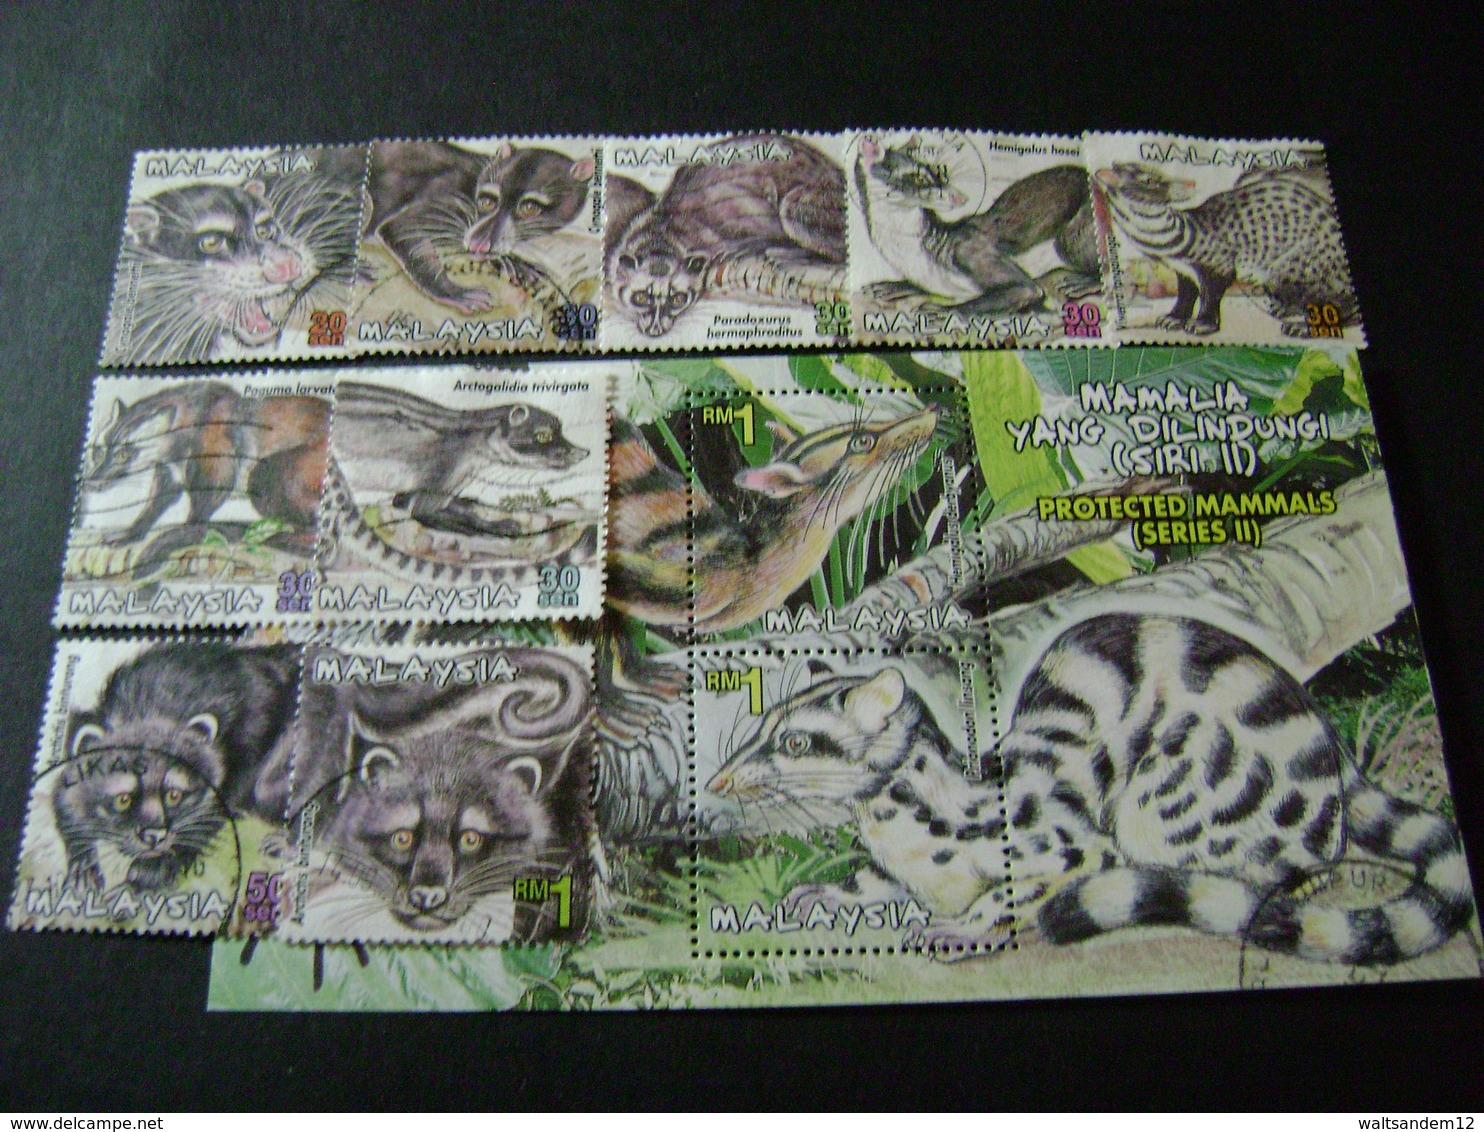 Malaysia 2000 stamp issues (between SG 840 and 969 - see description) 9 images - Used [Sale price]